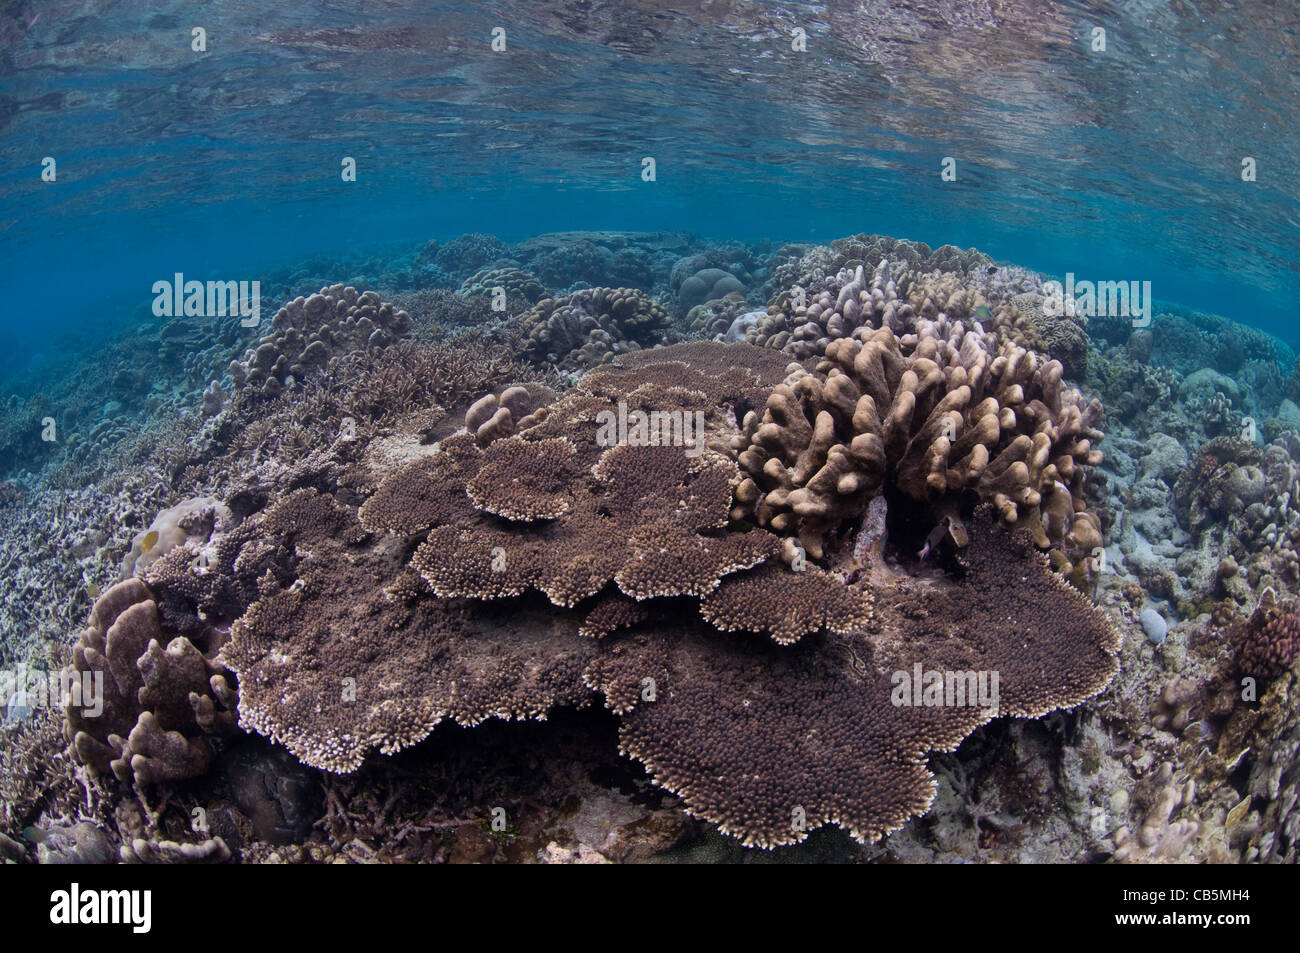 A hard coral garden, with a variety of table, leather, and staghorn corals, Lembeh Island, North Sulawesi, Indonesia Stock Photo